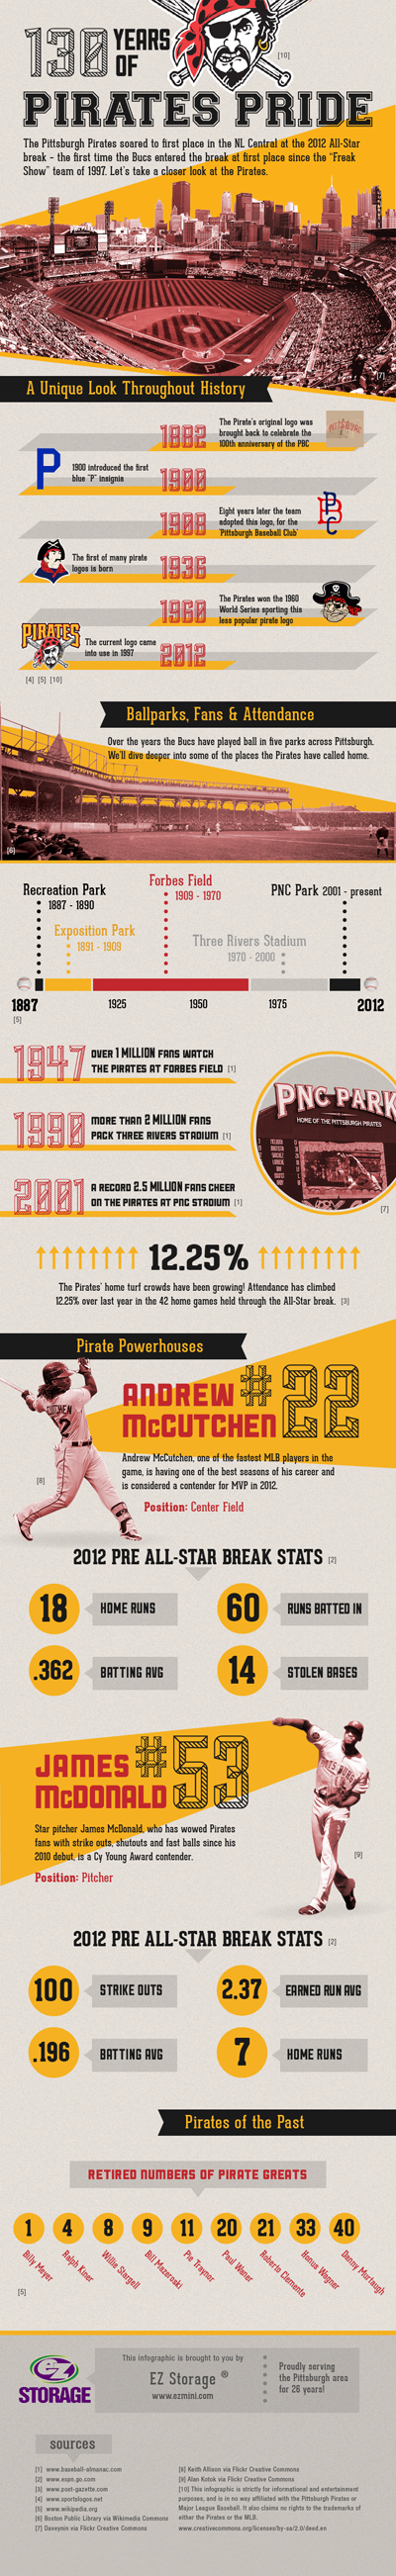 130 Years of Pirates Pride - a Pittsburgh Pirates Infographic